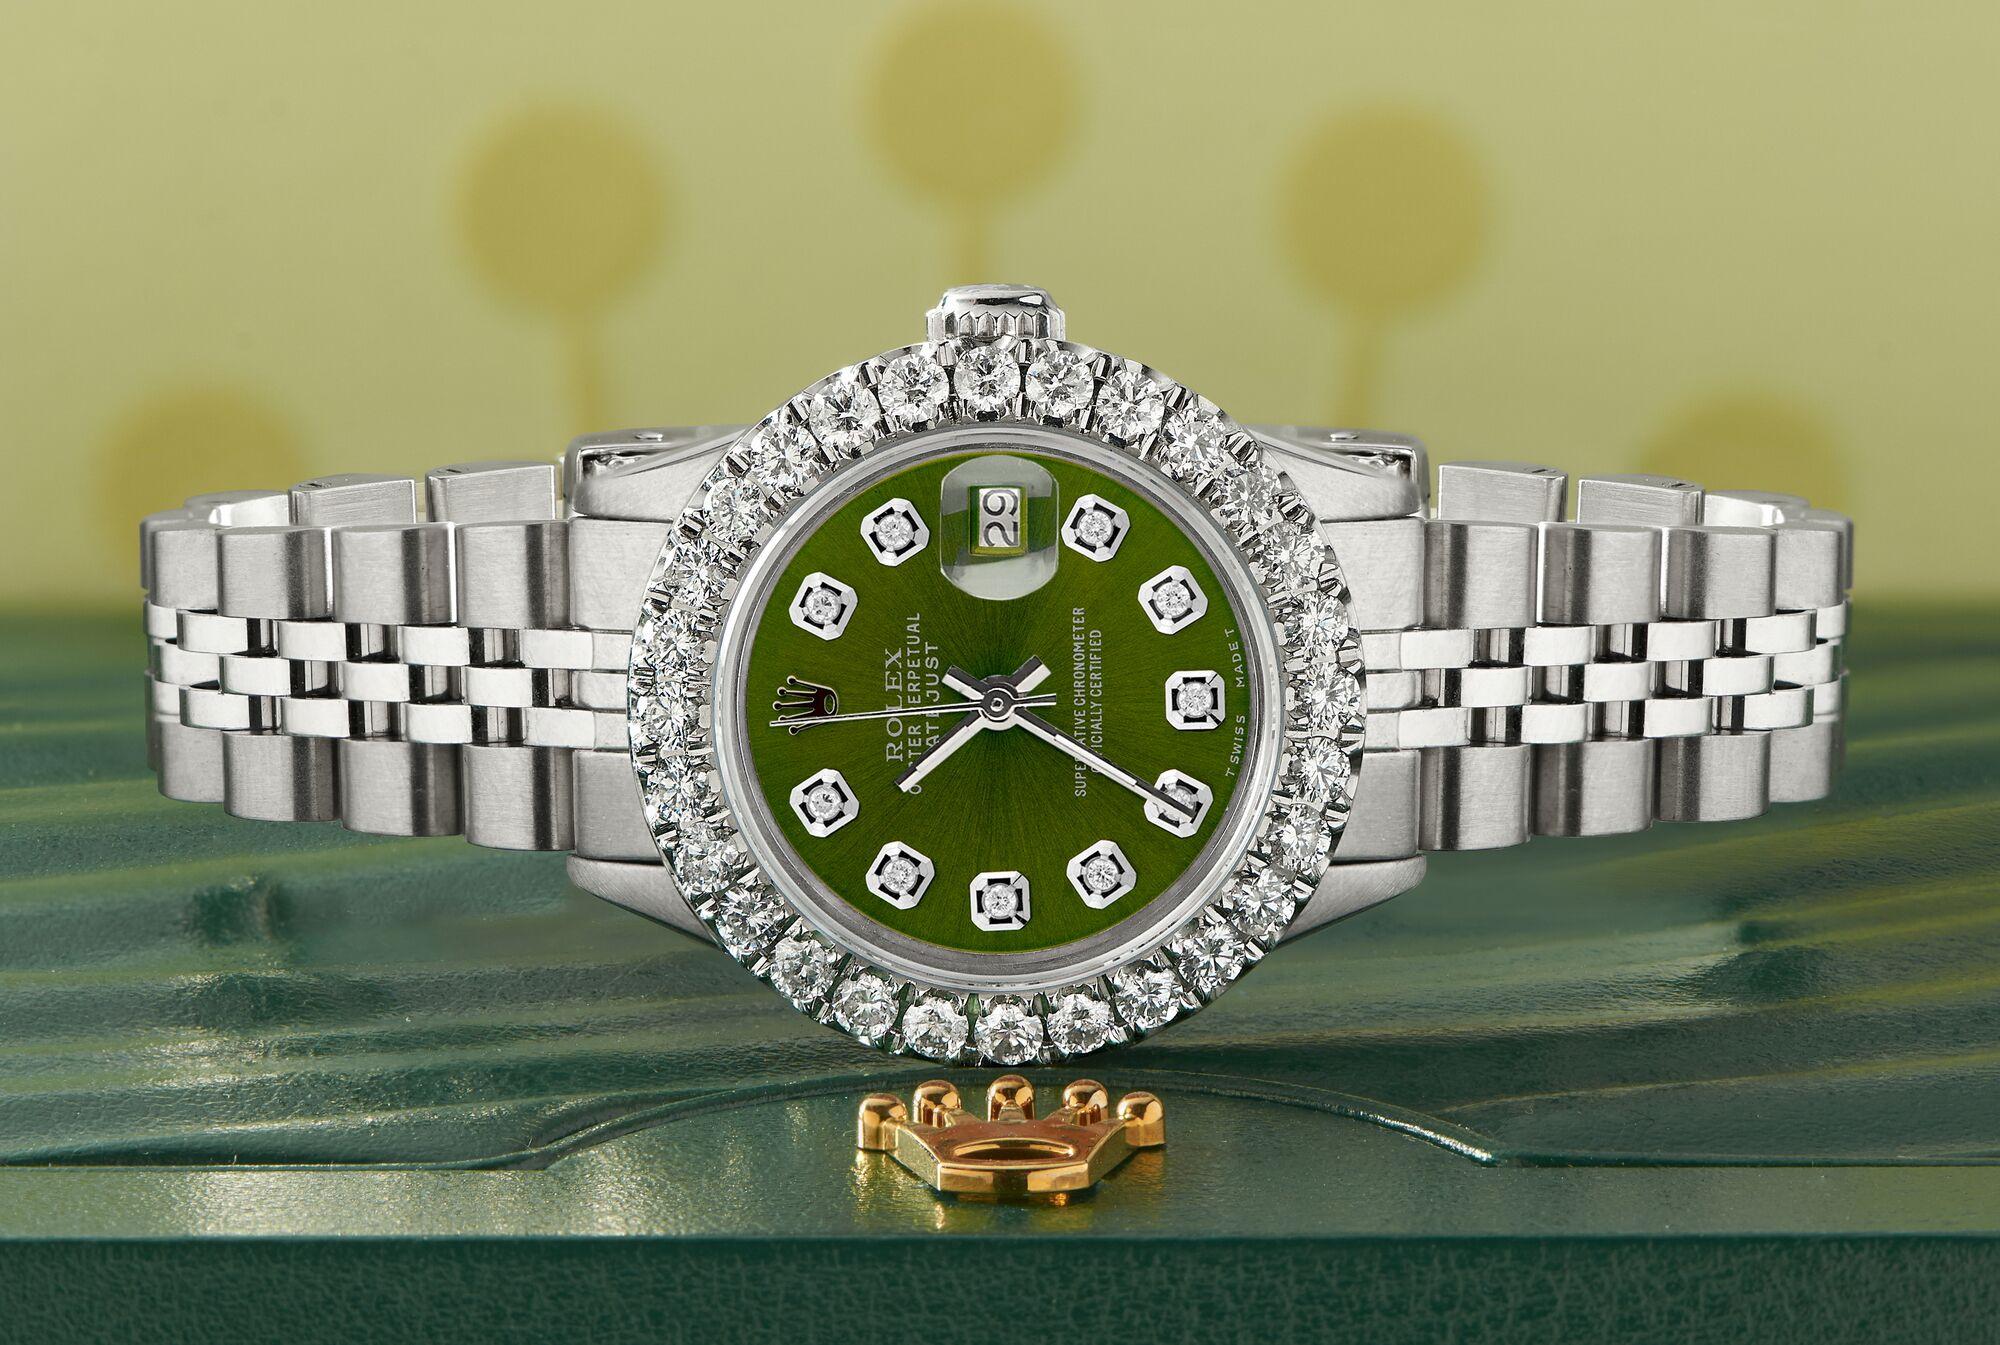 Rolex Datejust Steel Ladies Watch. Self-winding Rolex automatic movement. Stainless steel case 26mm in diameter. Custom 2.0ct diamond bezel. Screw-down crown. Scratch-resistant sapphire crystal. Custom royal green diamond dial. Factory stainless